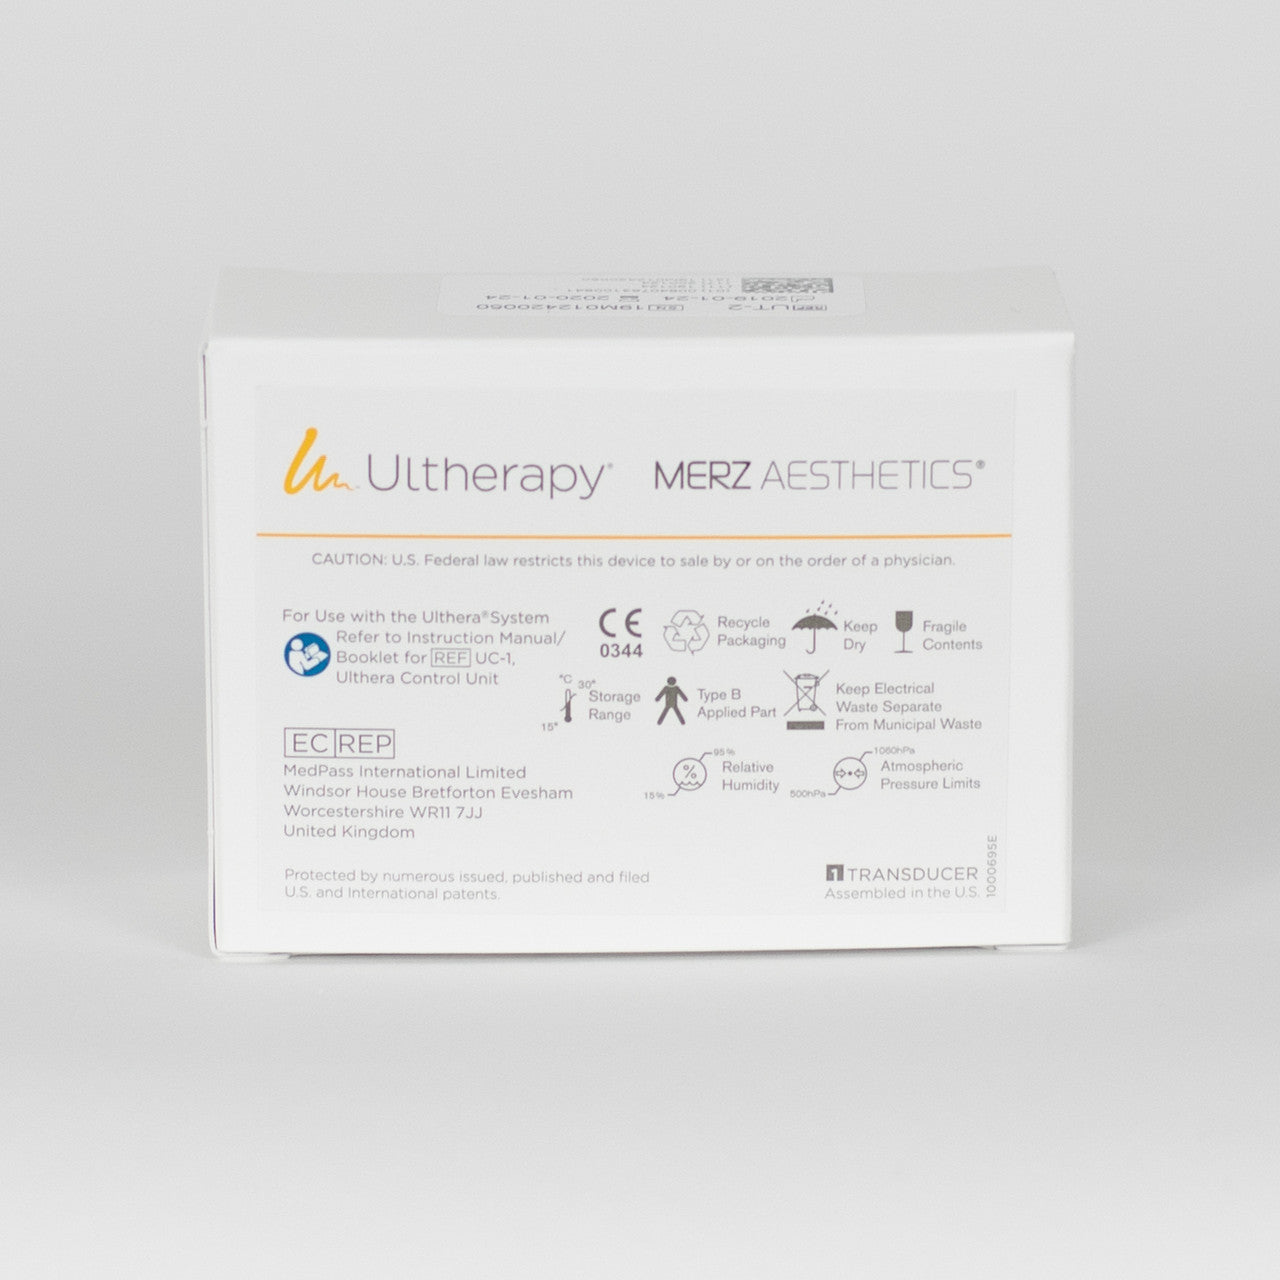 Ultherapy DeepSEE DS 7-4.5 (Purple) Transducer item information